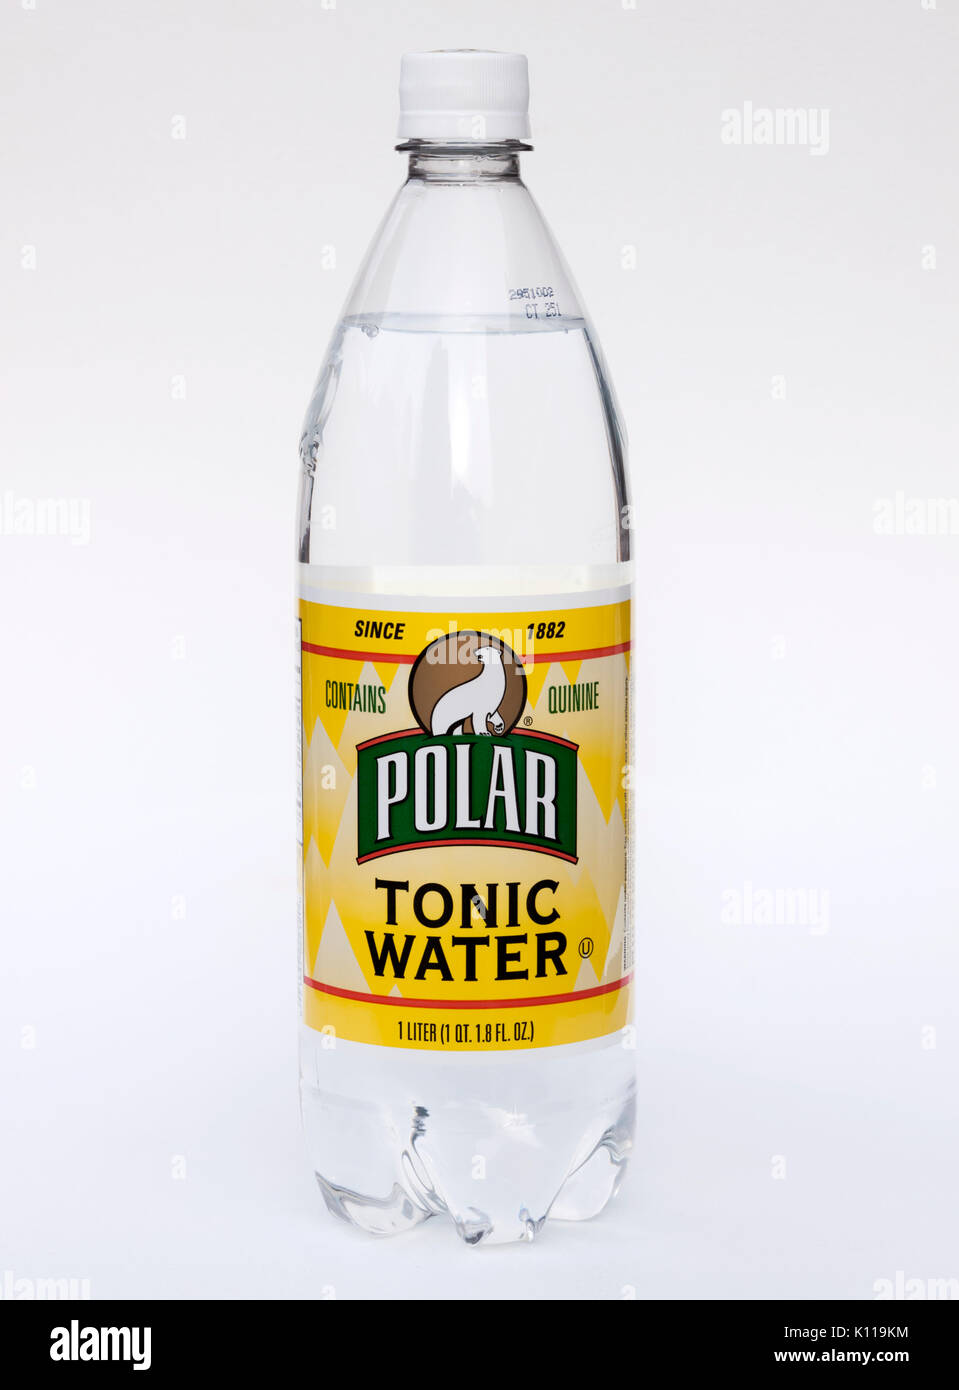 Bottle of Polar Tonic Water.  Contains quinine which helps stop foot and leg muscle cramps. Stock Photo